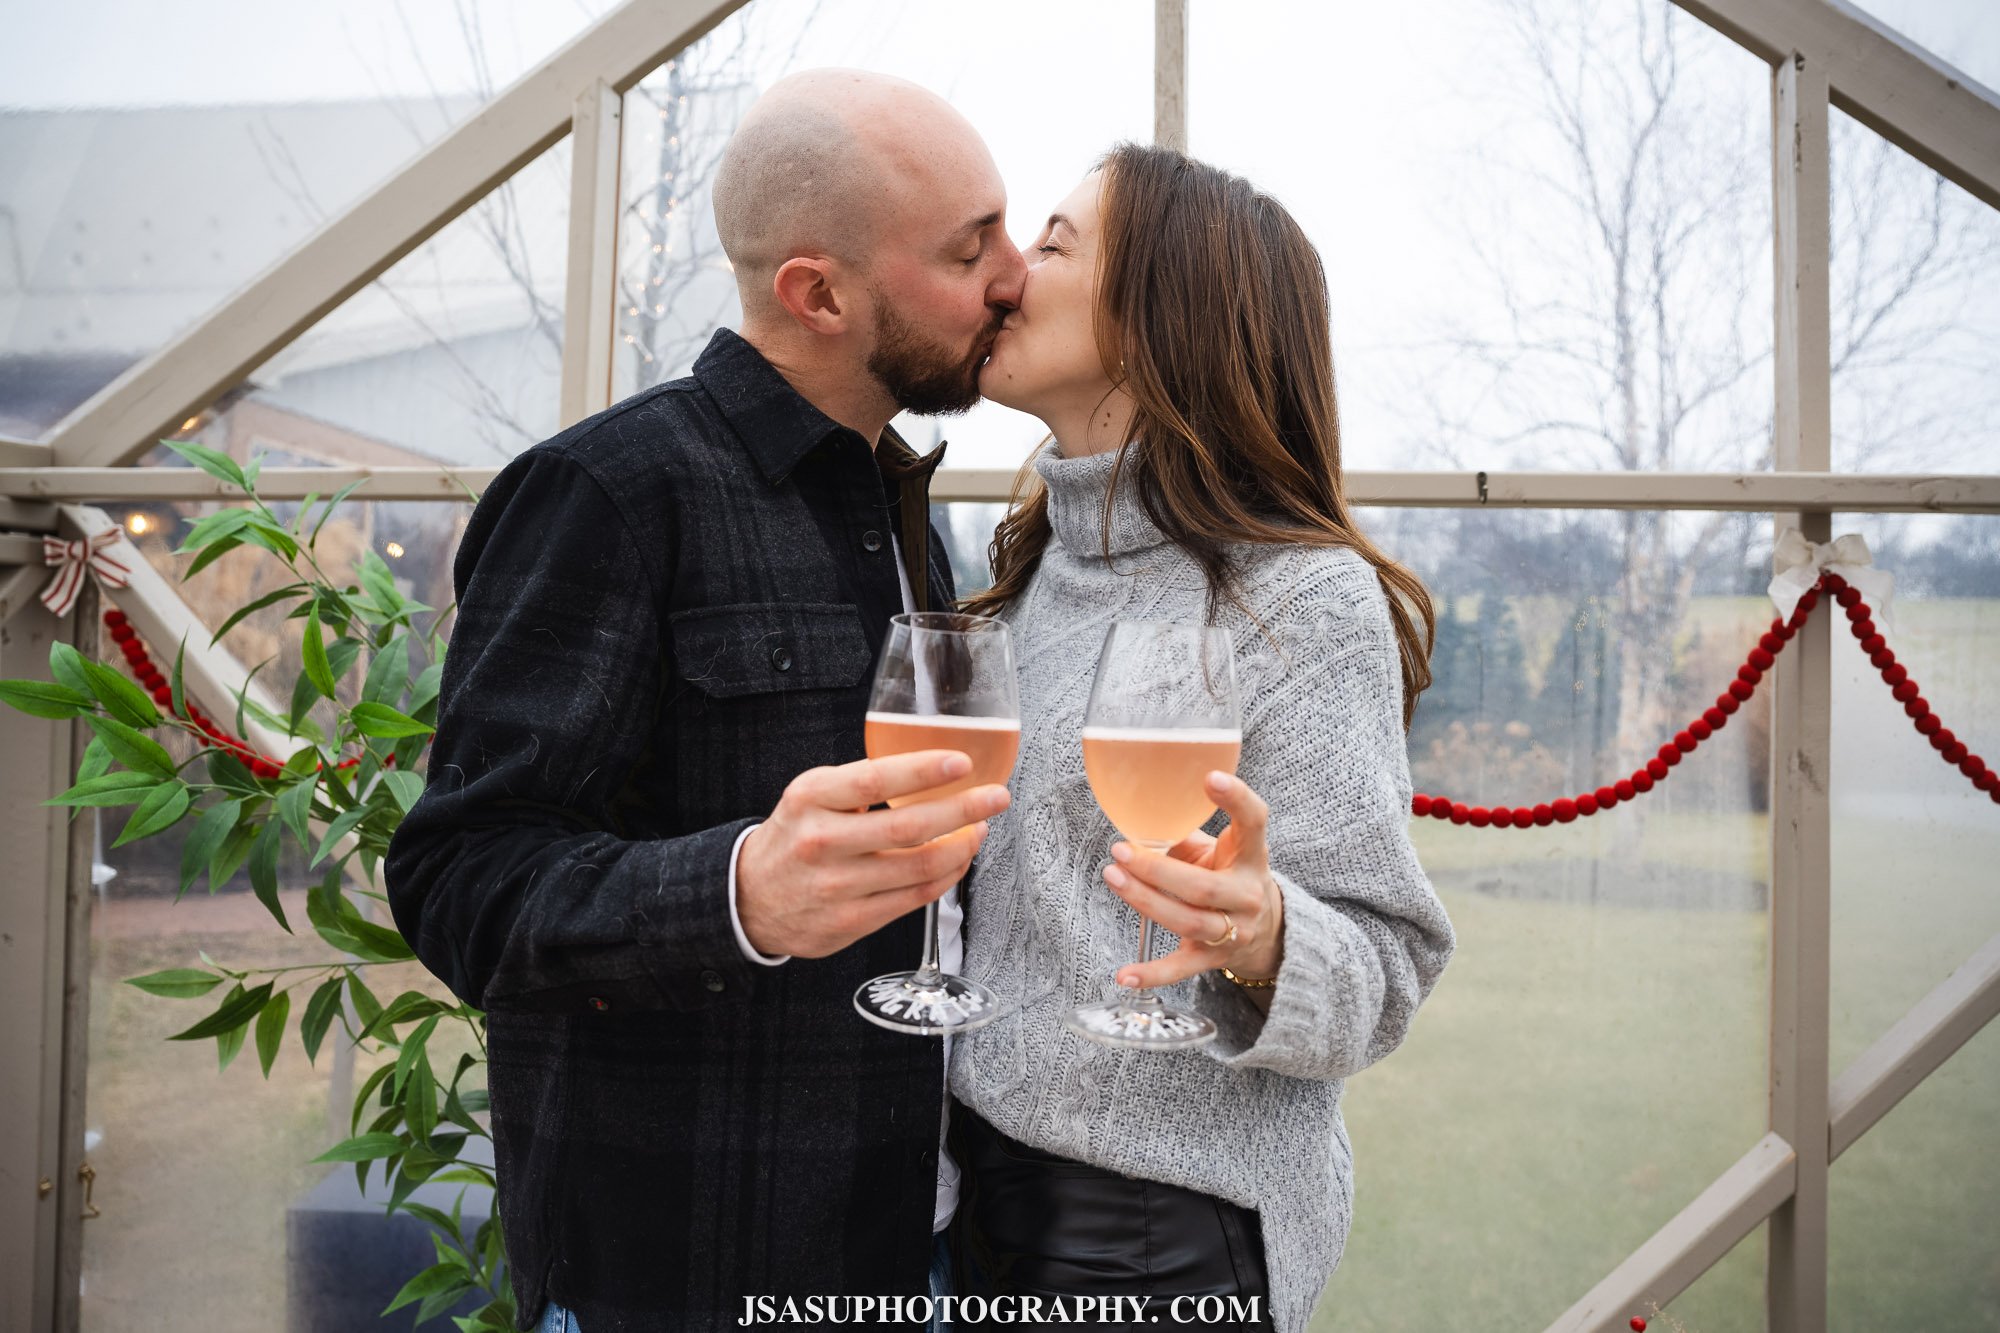 drew-alex-surprise-proposal-photos-old-westminister-winery-jsasuphotography-19.jpg